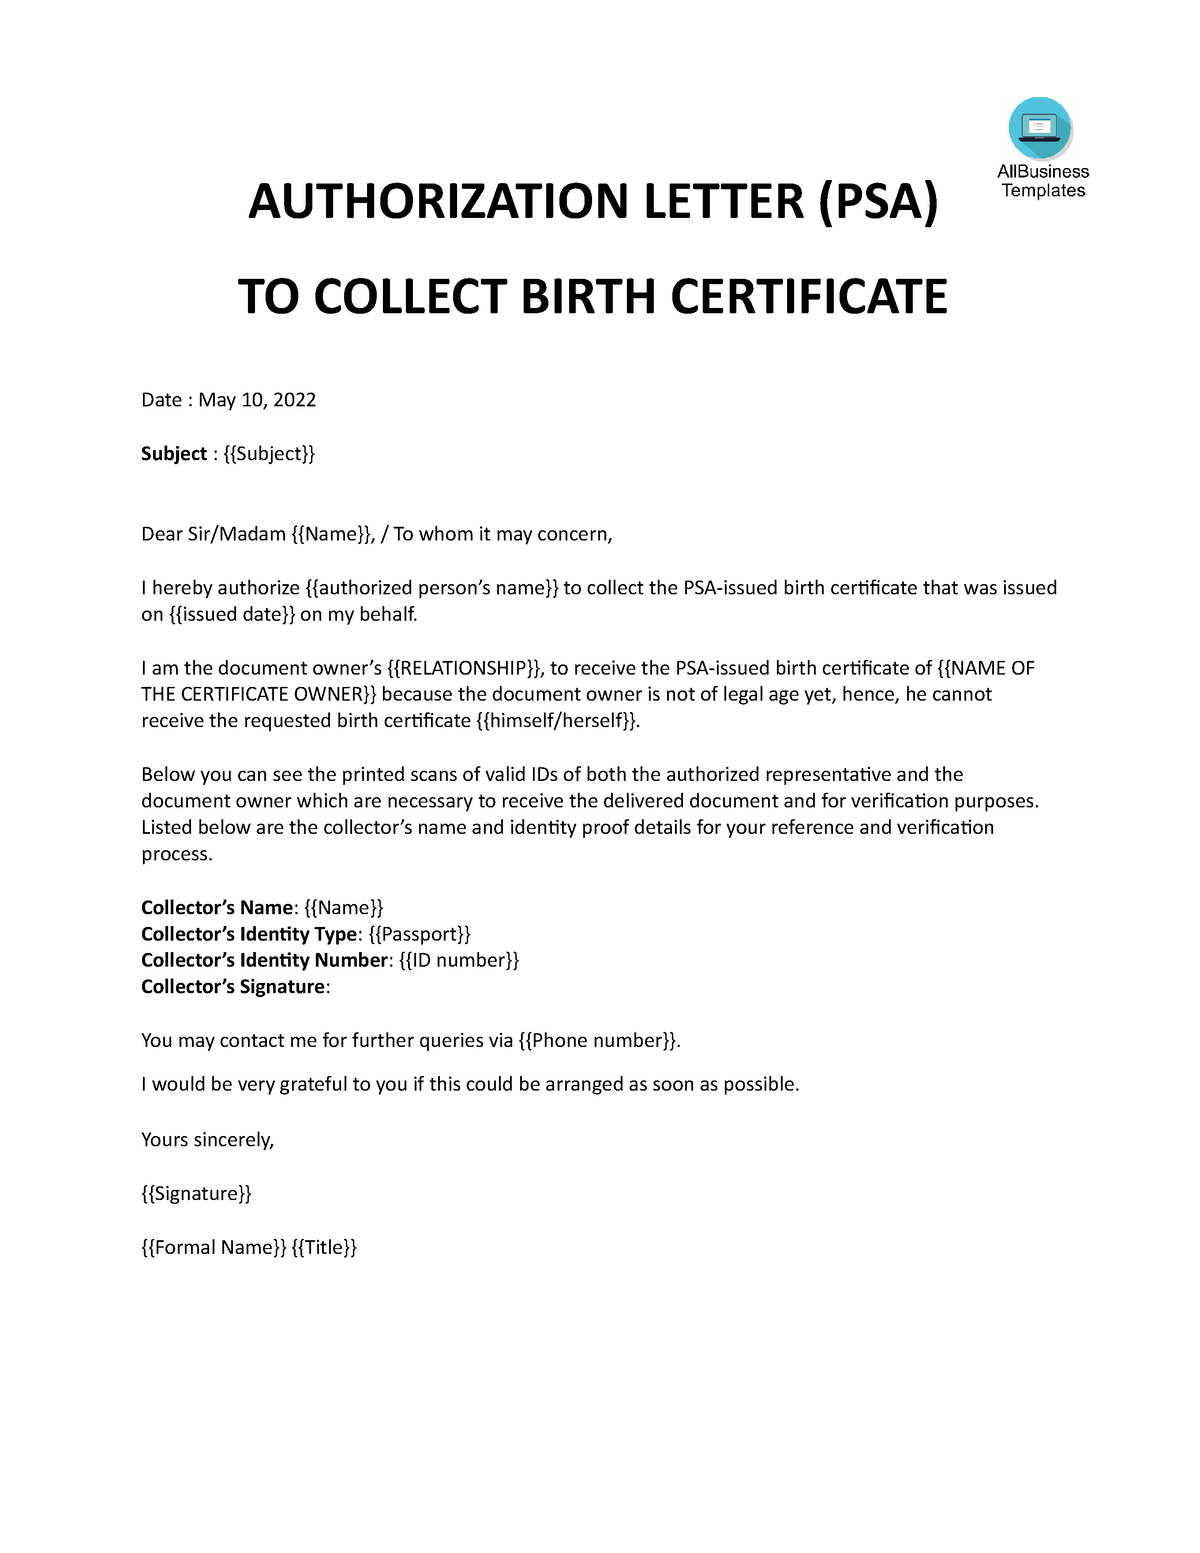 psa authorization letter - (psa) to collect birth certificate date : may 10, studocu word free cv template professional format file download